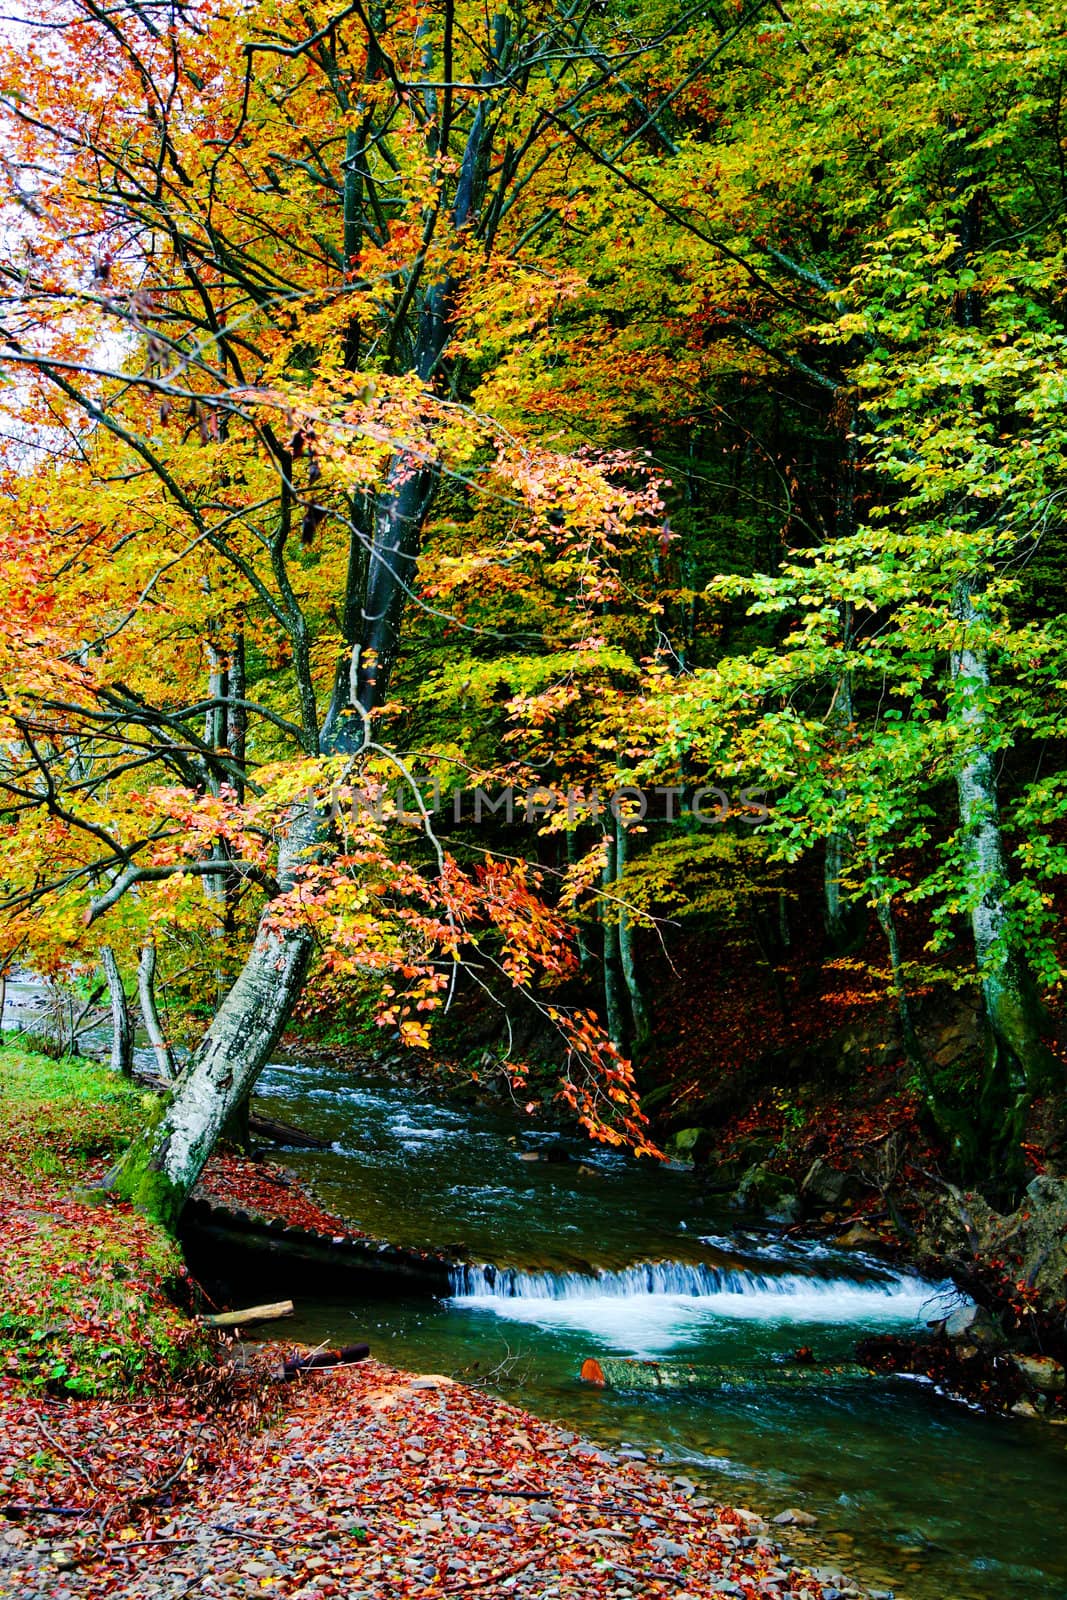 An image of river in autumn mountains